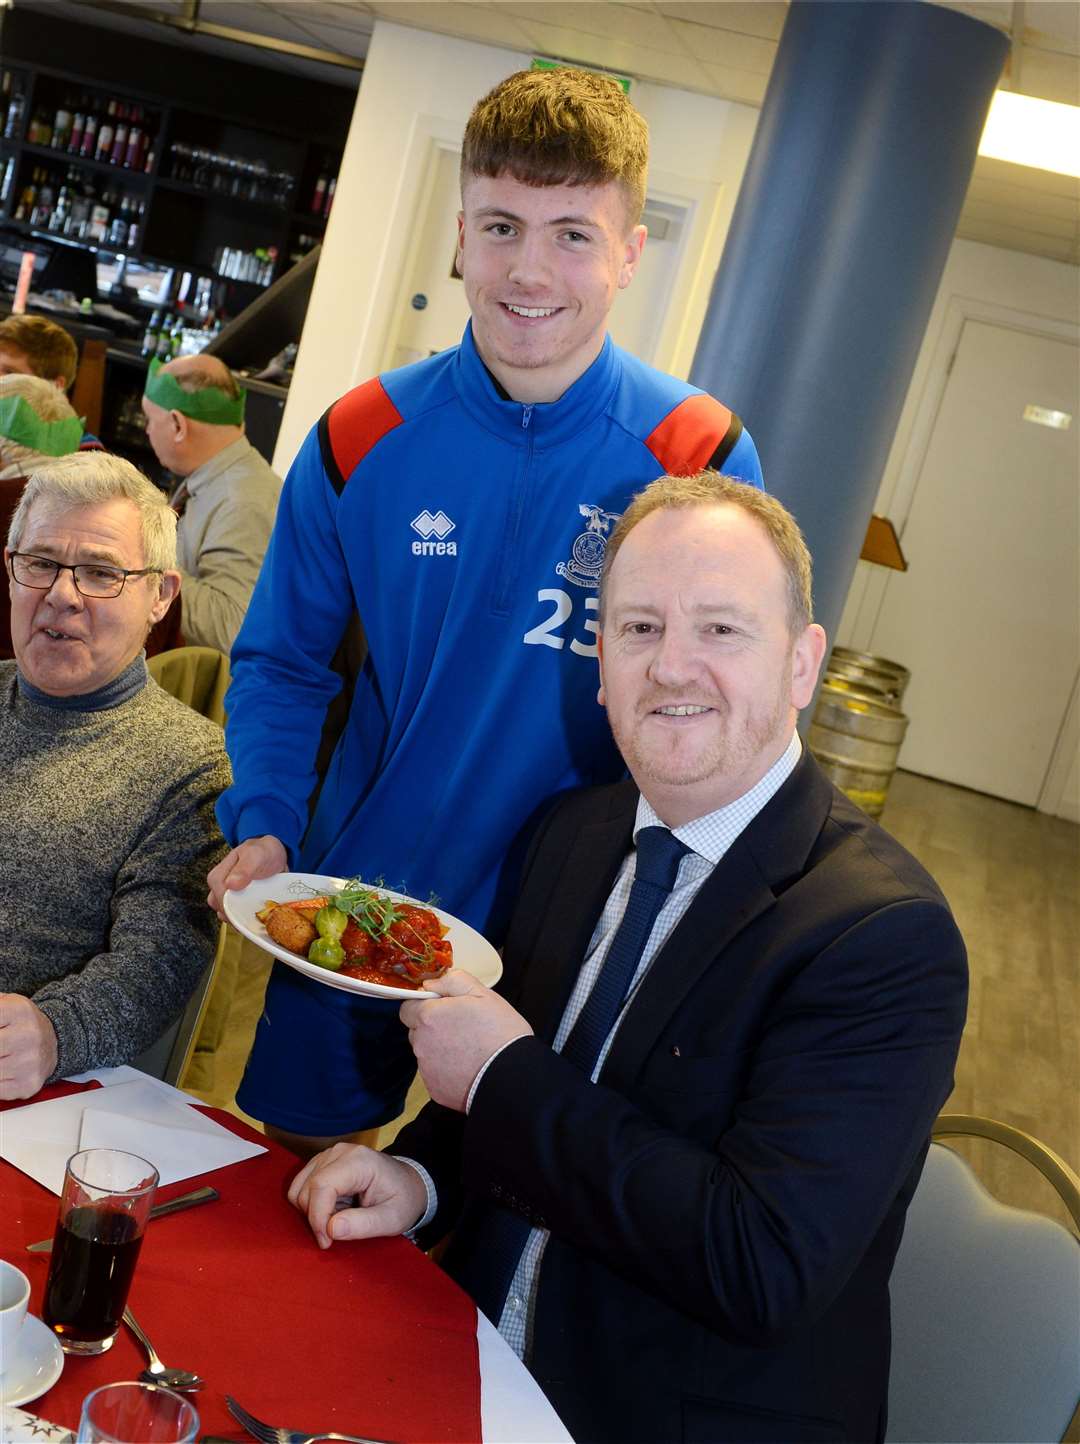 Inverness Caledonian Thistle hold a Festive Friends Christmas meal. Daniel MacKay with Scot Gardiner. Picture: Gary Anthony.